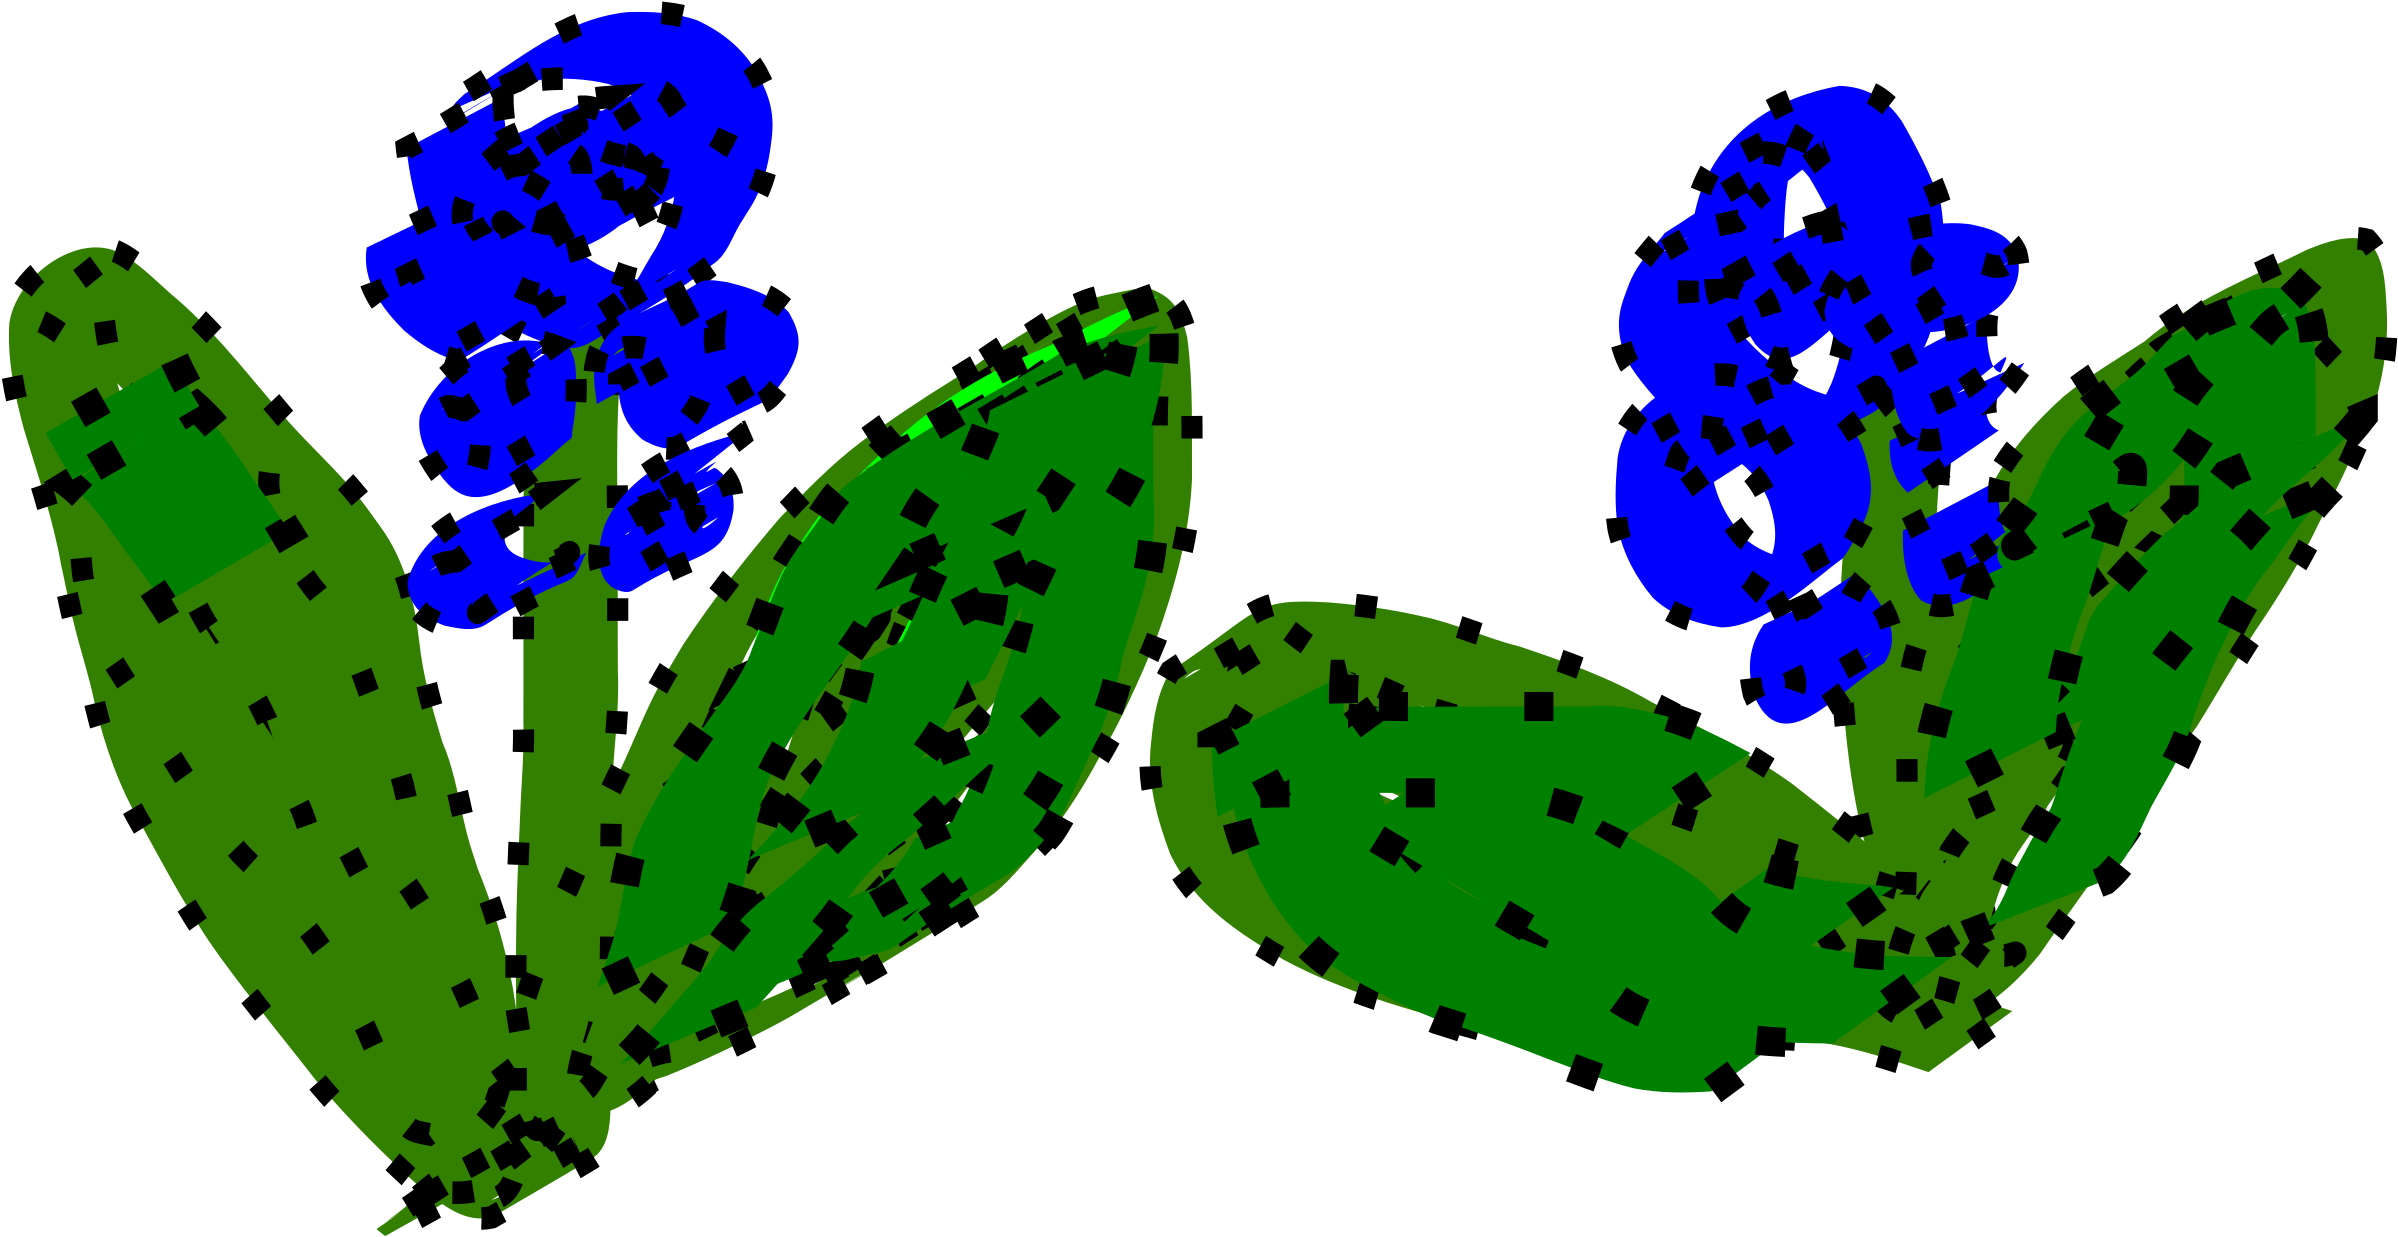 A Drawing Of A Plant